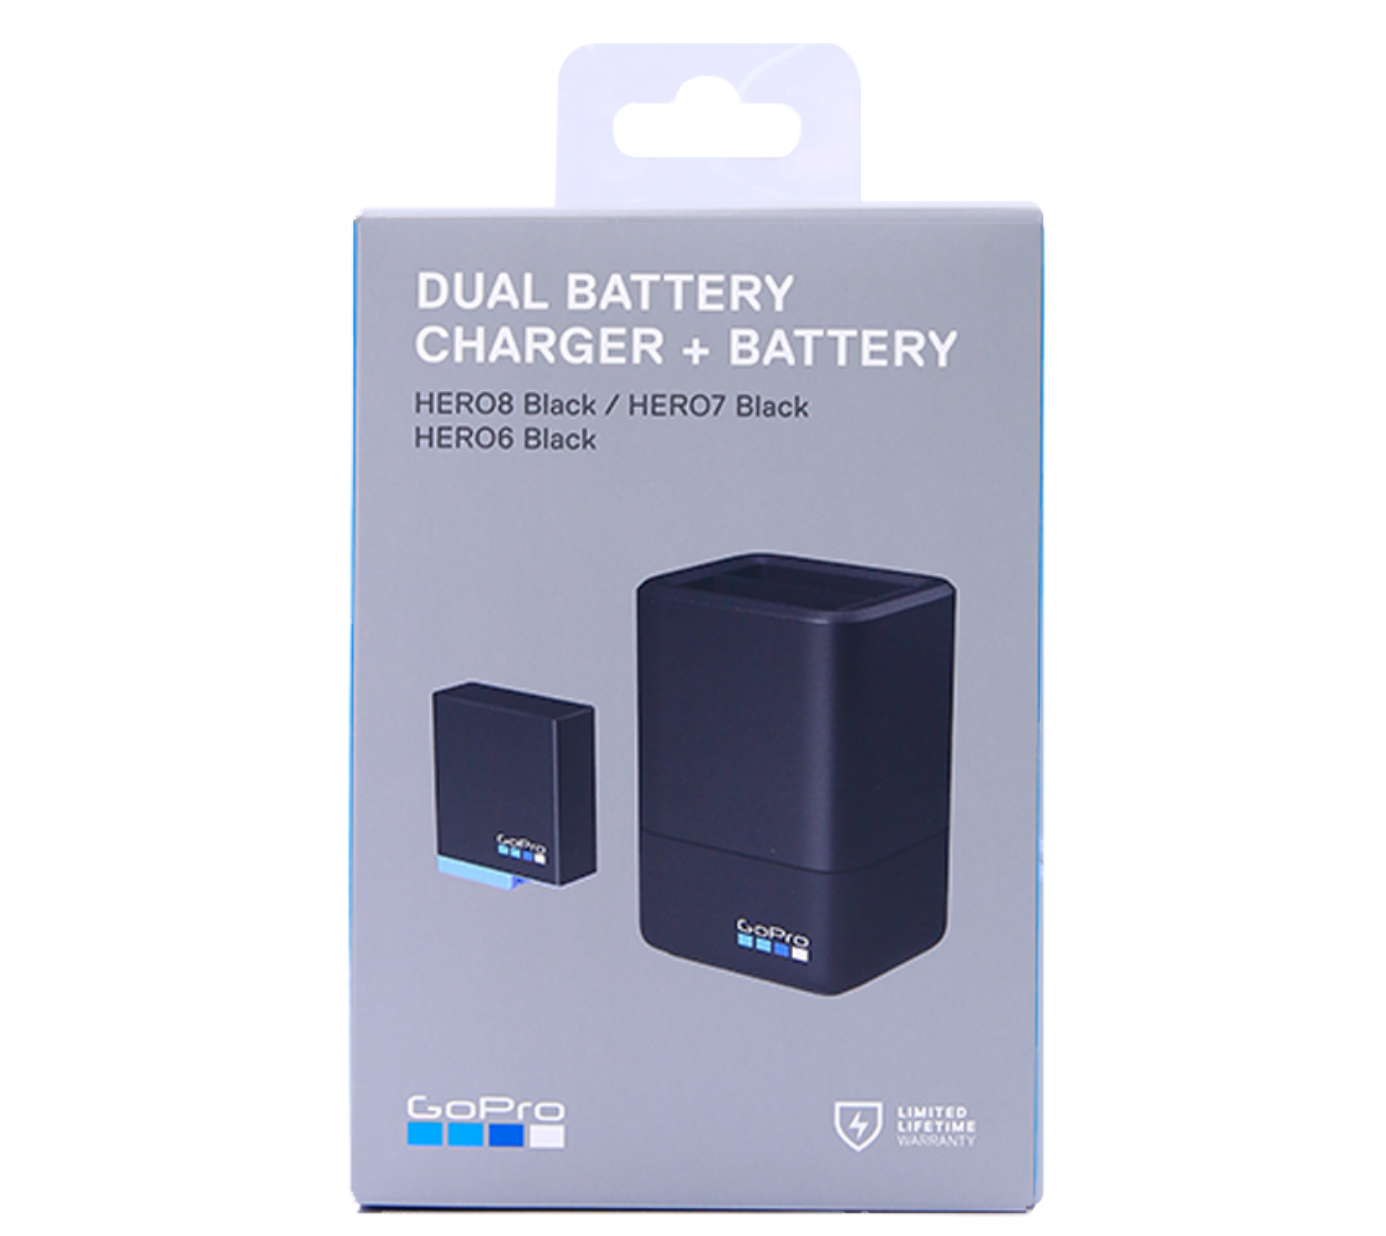 GOPRO Dual Battery Charger + Battery (HERO8 Black/HERO7 Black/HERO6 Black)